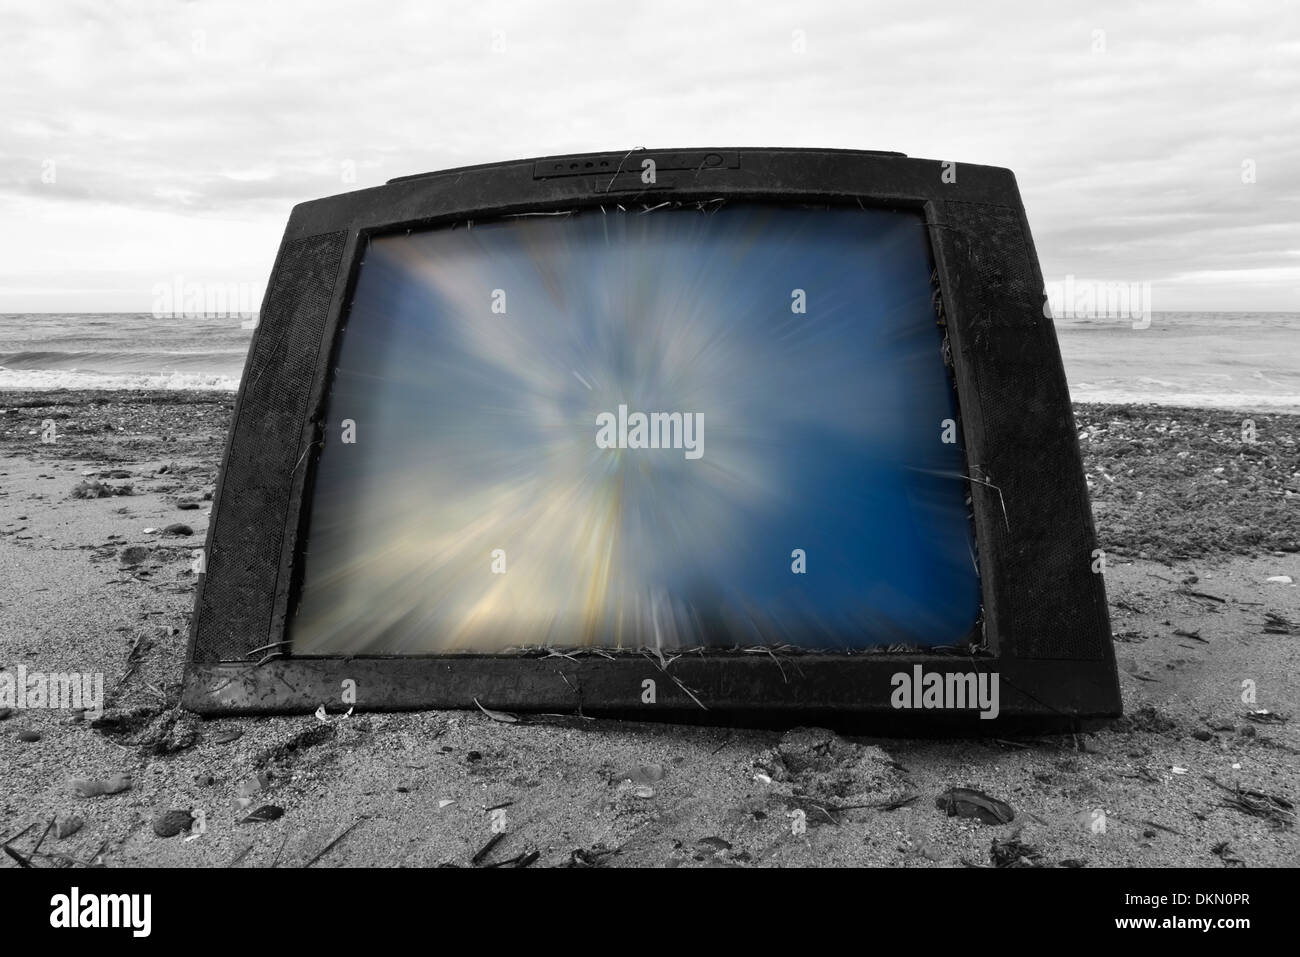 Television set washed up on a beach. Stock Photo